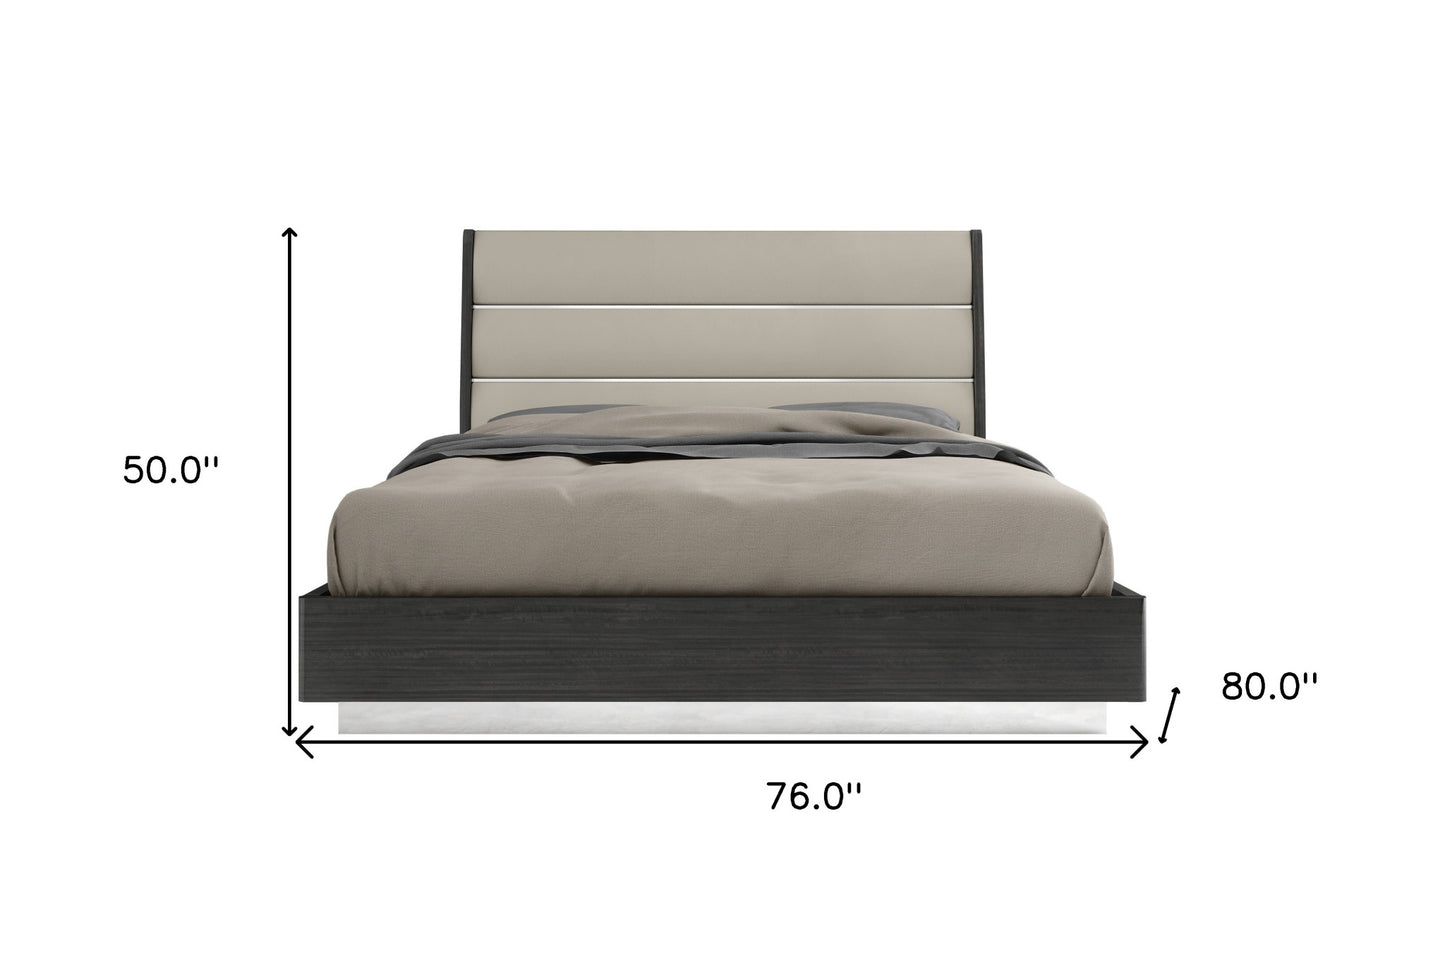 King Dark Grey High Gloss Bed Frame with Faux Leather Headboard